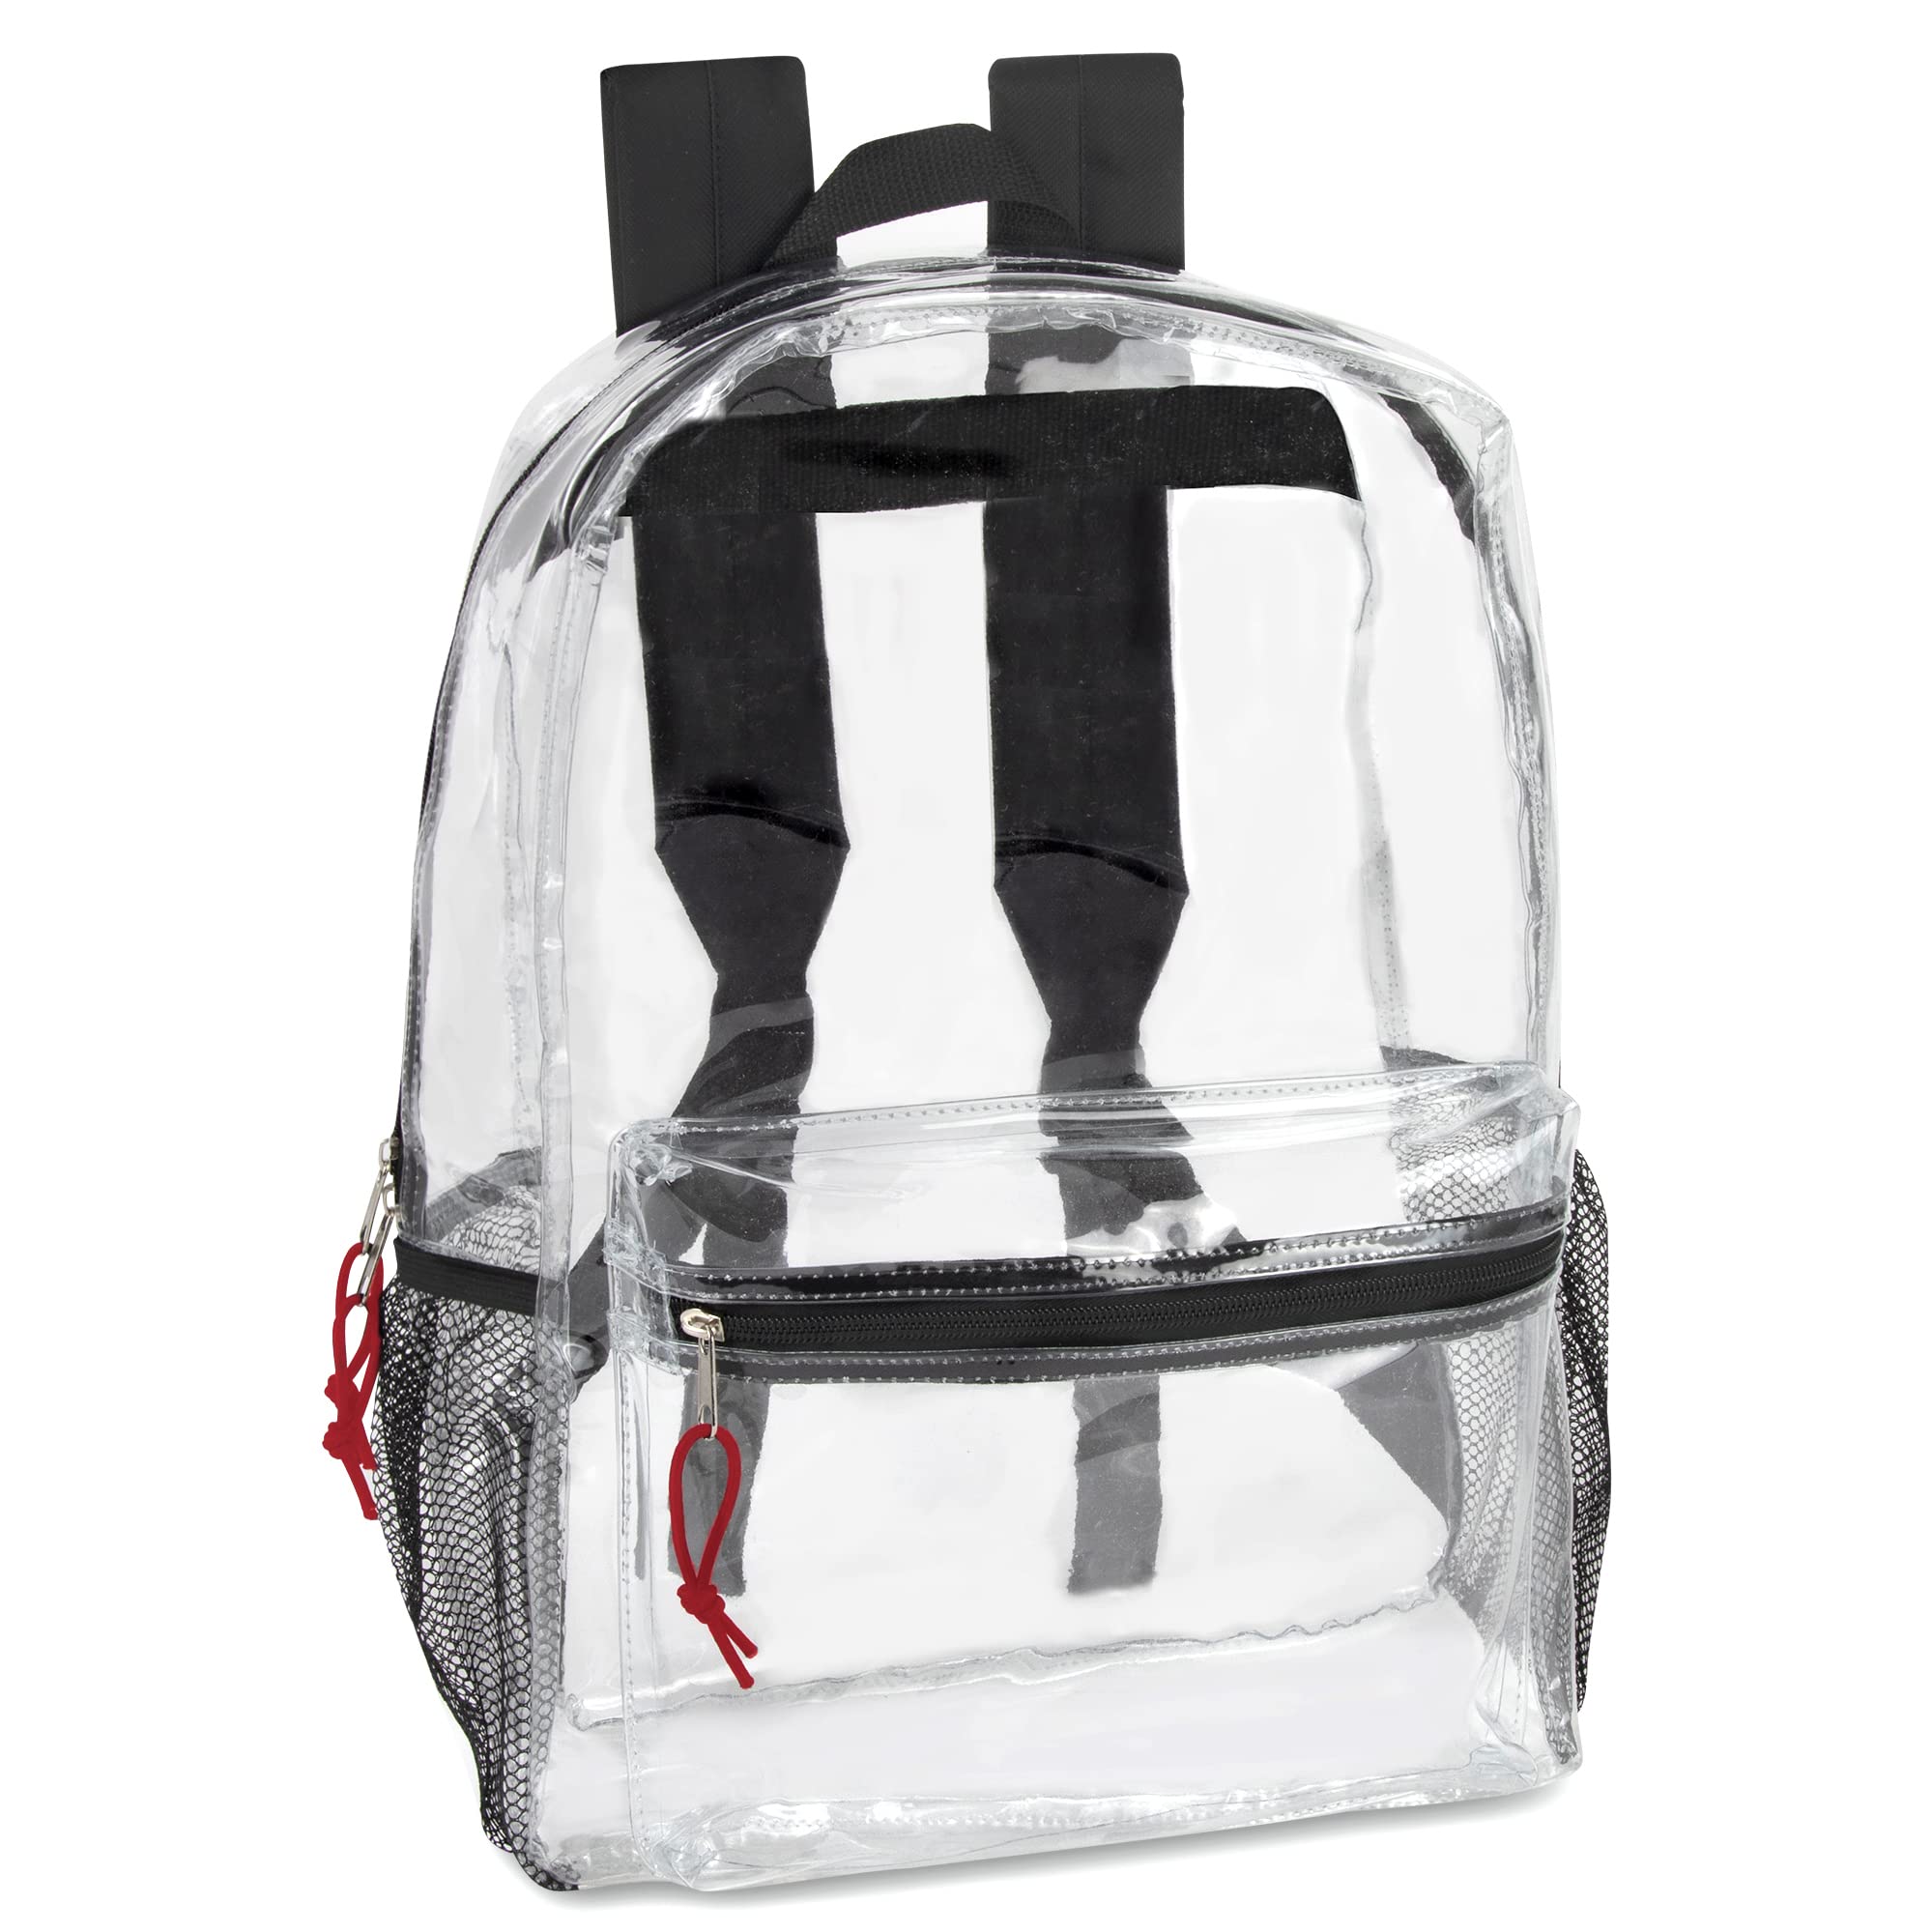 Trail maker Clear Backpack With Reinforced Straps & Front Accessory Pocket - Perfect for School, Security, & Sporting Events